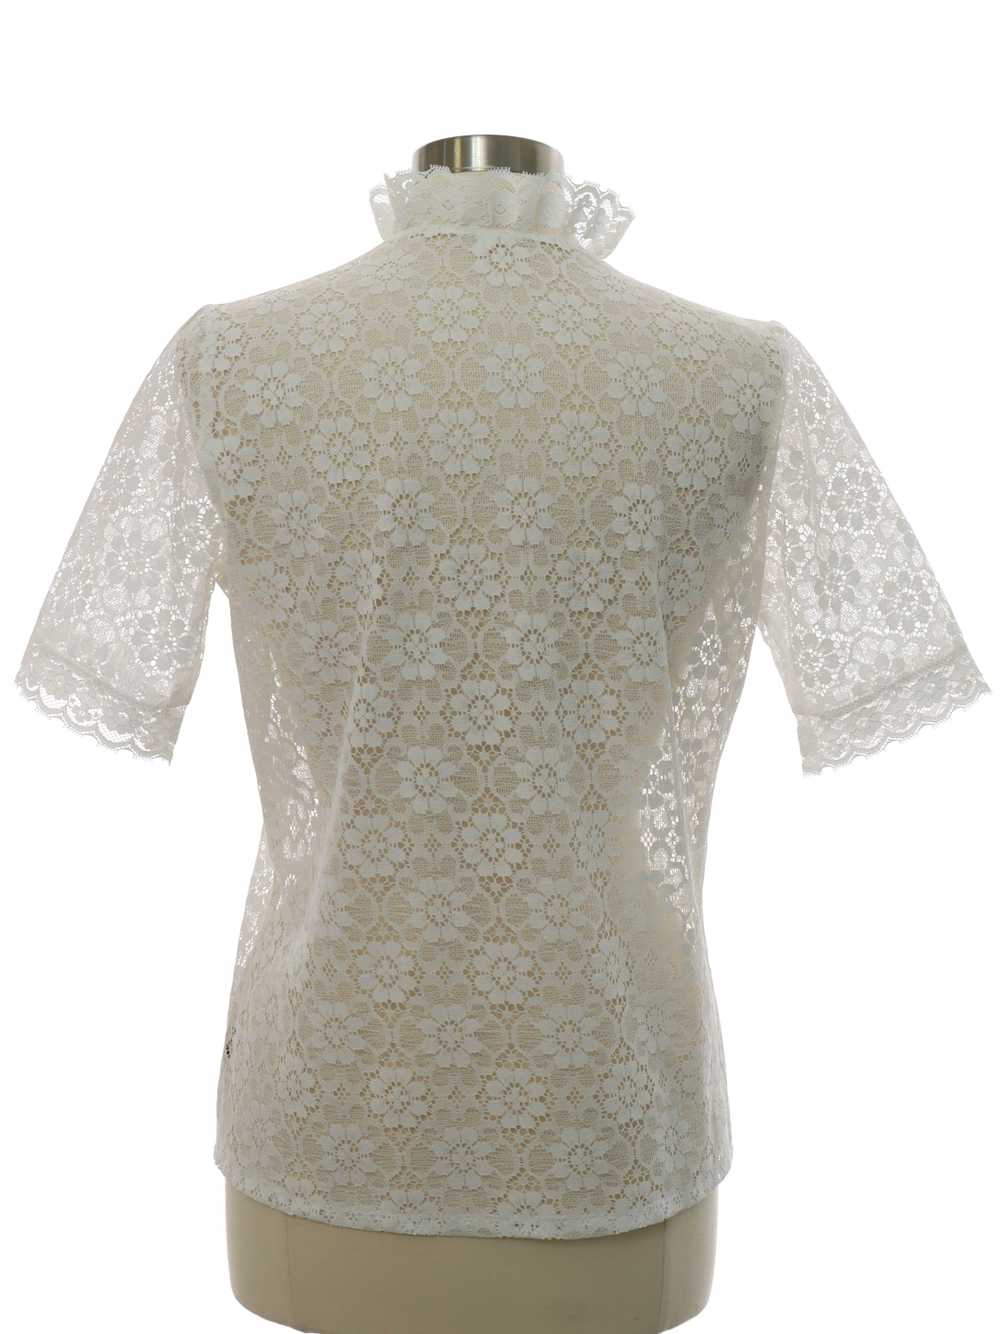 1970's Womens Ruffled Front Lace Shirt - image 3